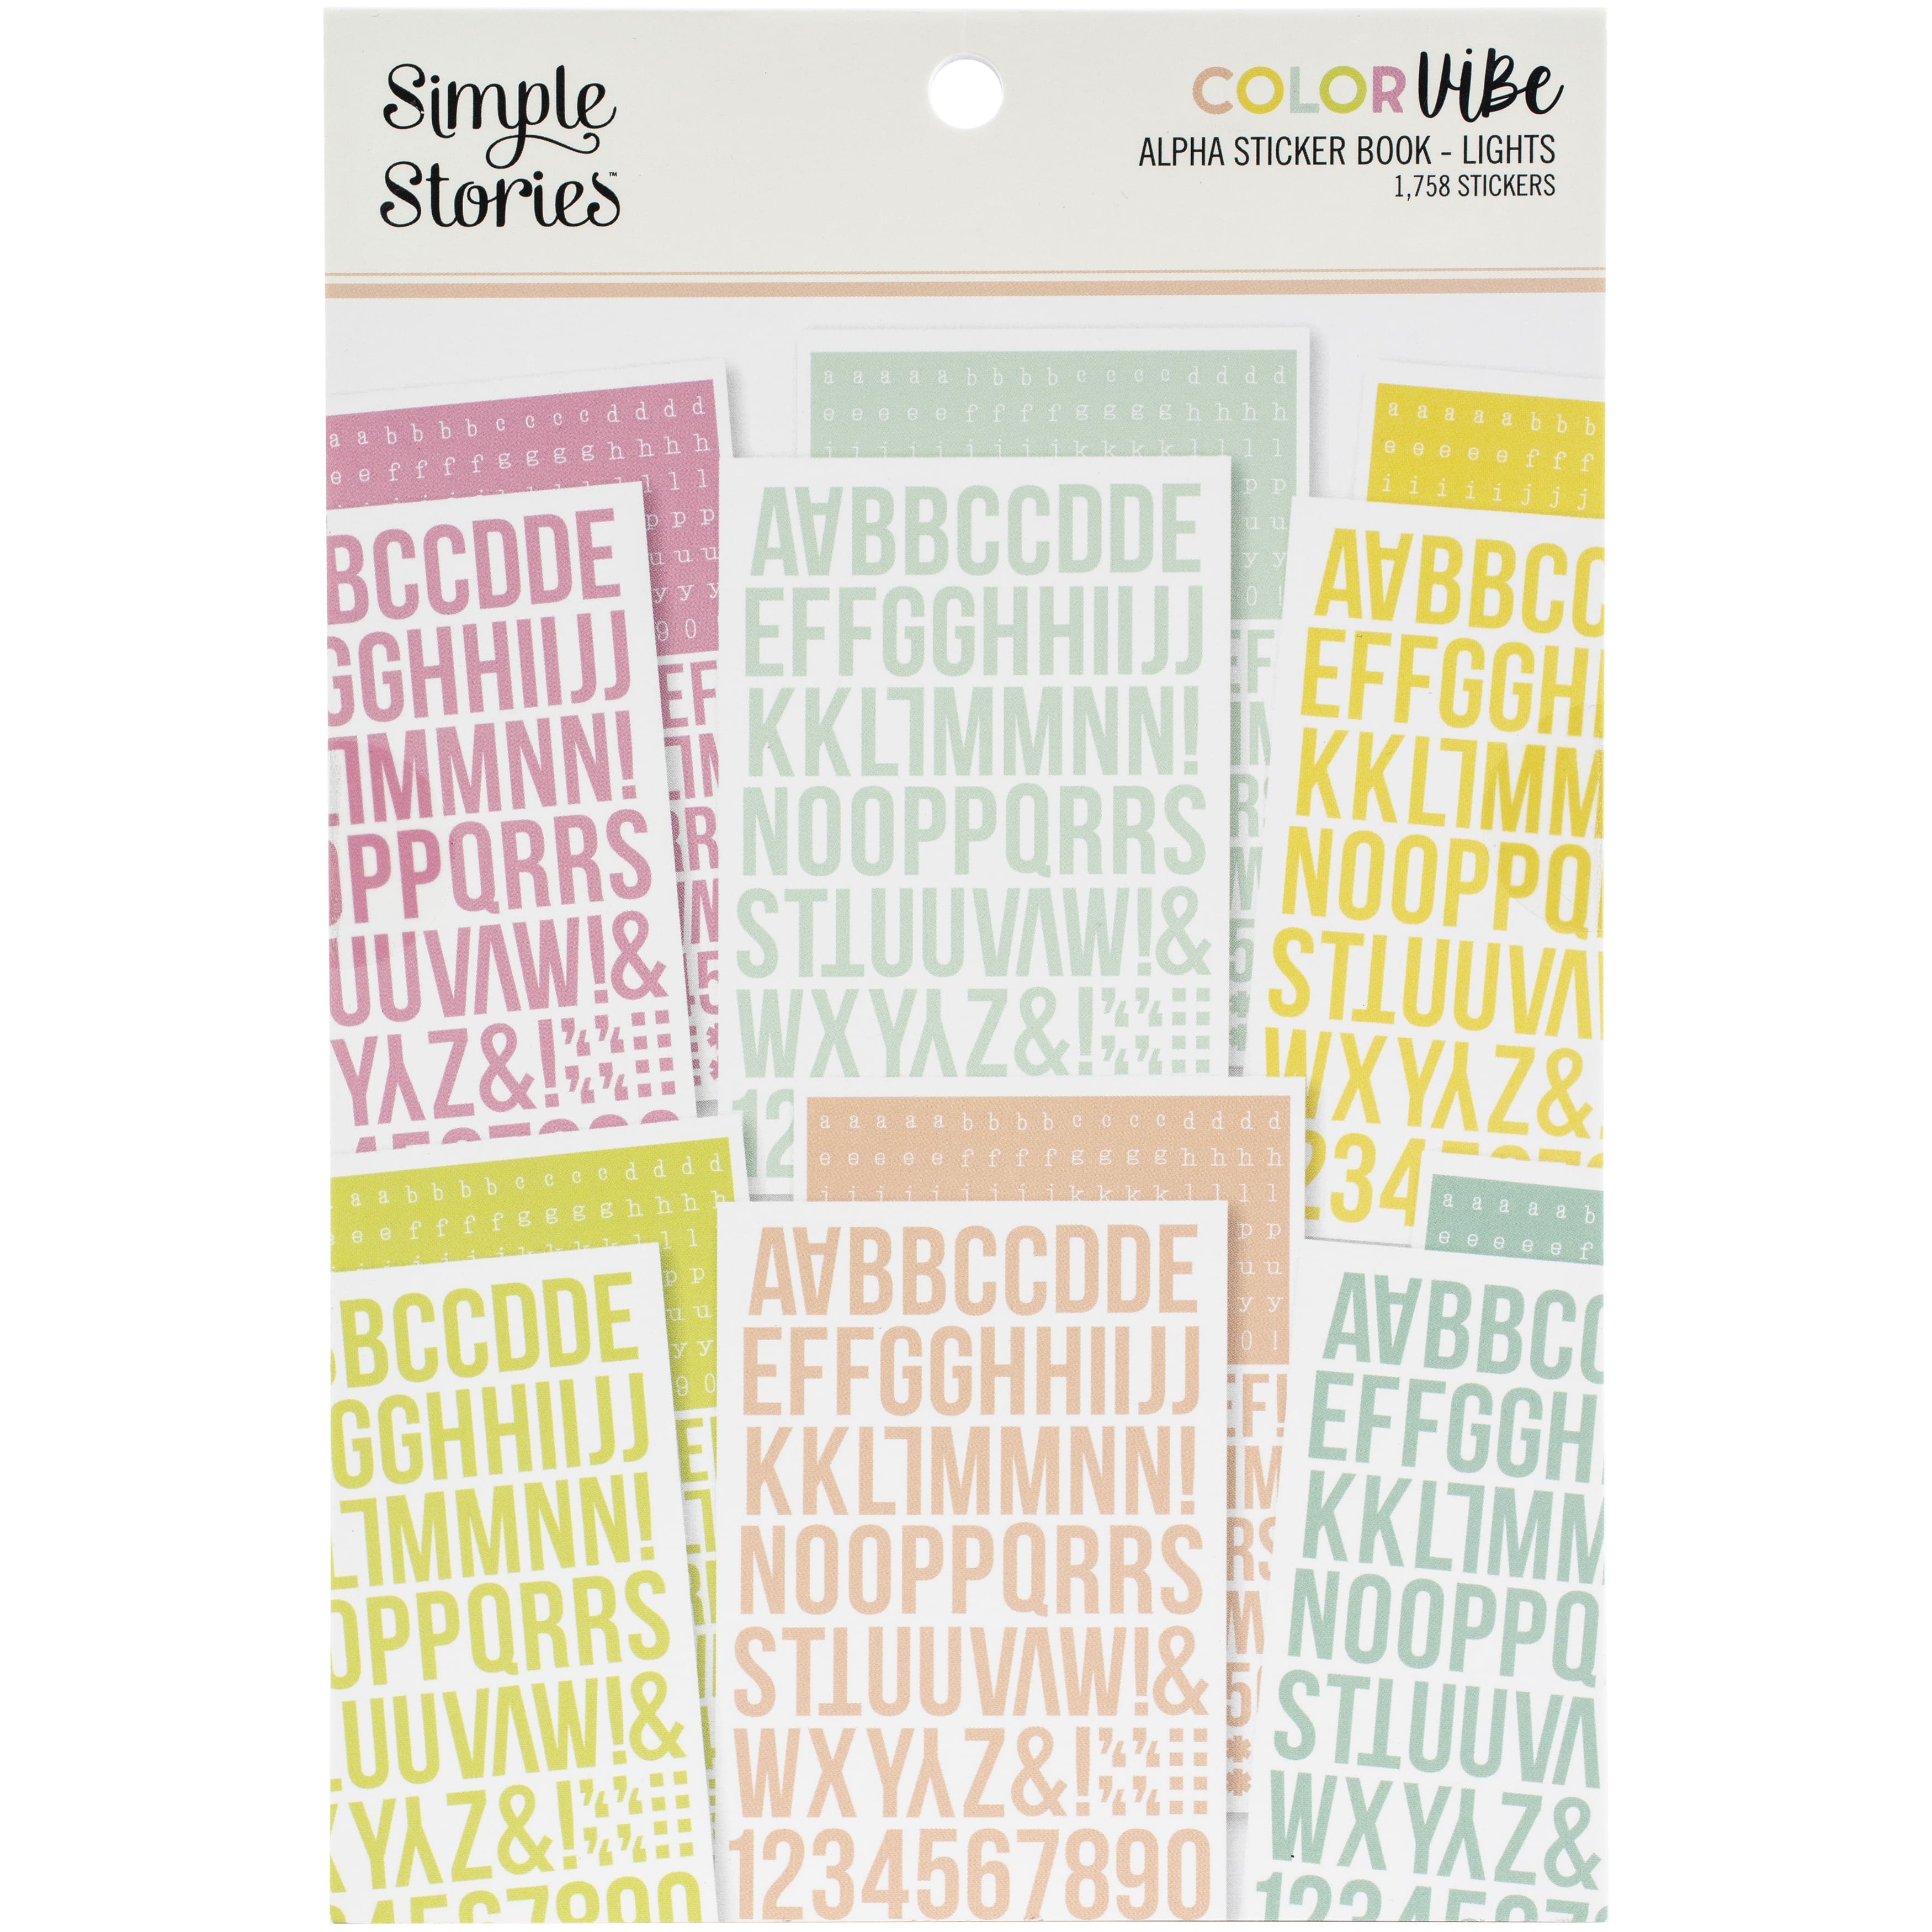 Simple Stories Color Vibe Alpha Sticker Book